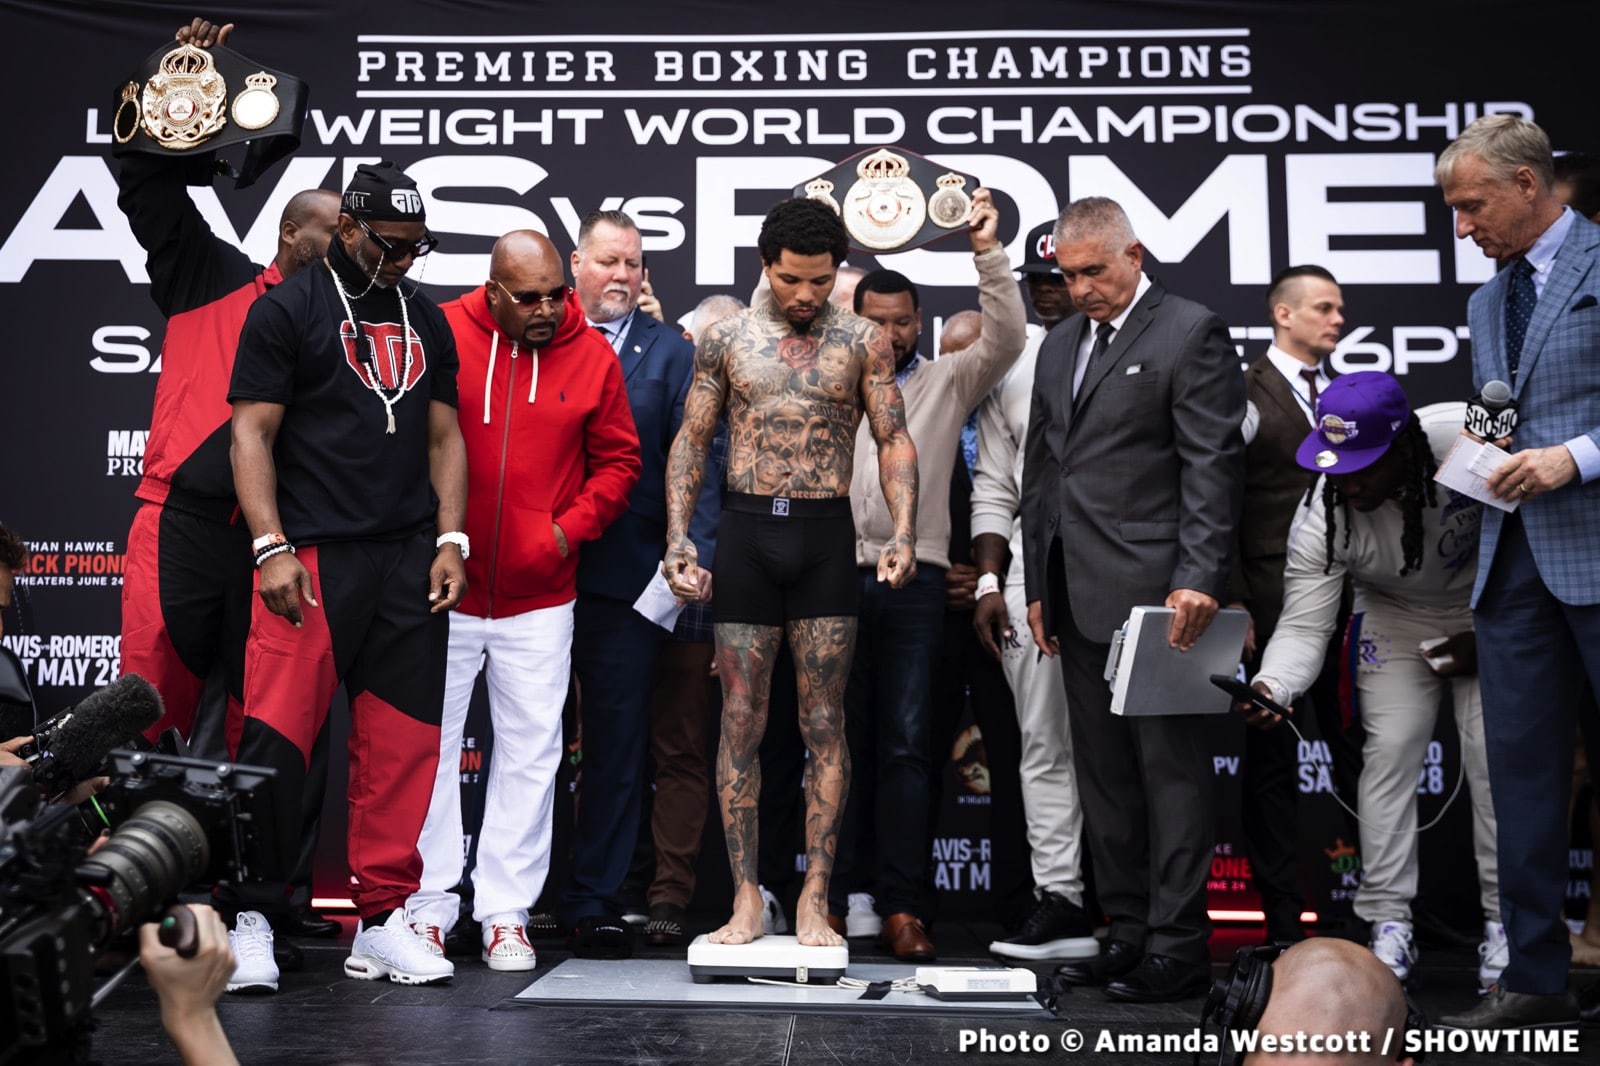 Image: Davis - Romero Official Showtime Weigh In Results & Photos